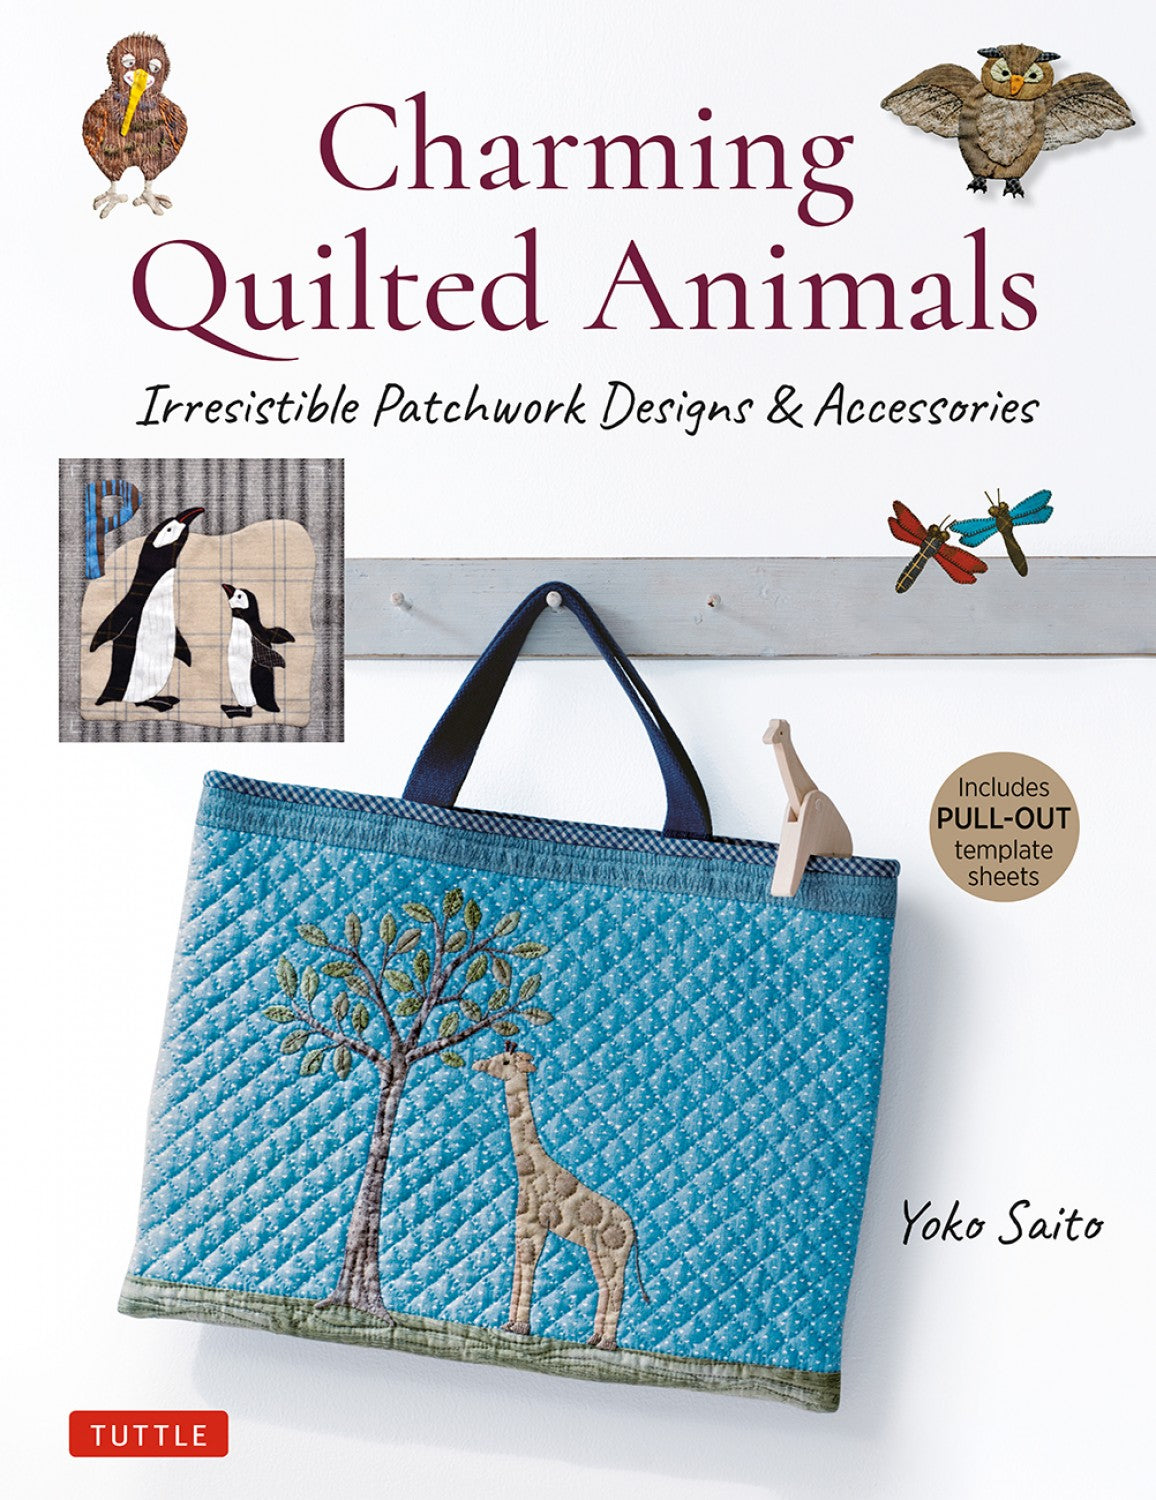 Charming Quilted Animals by Yoko Saito T5382-8